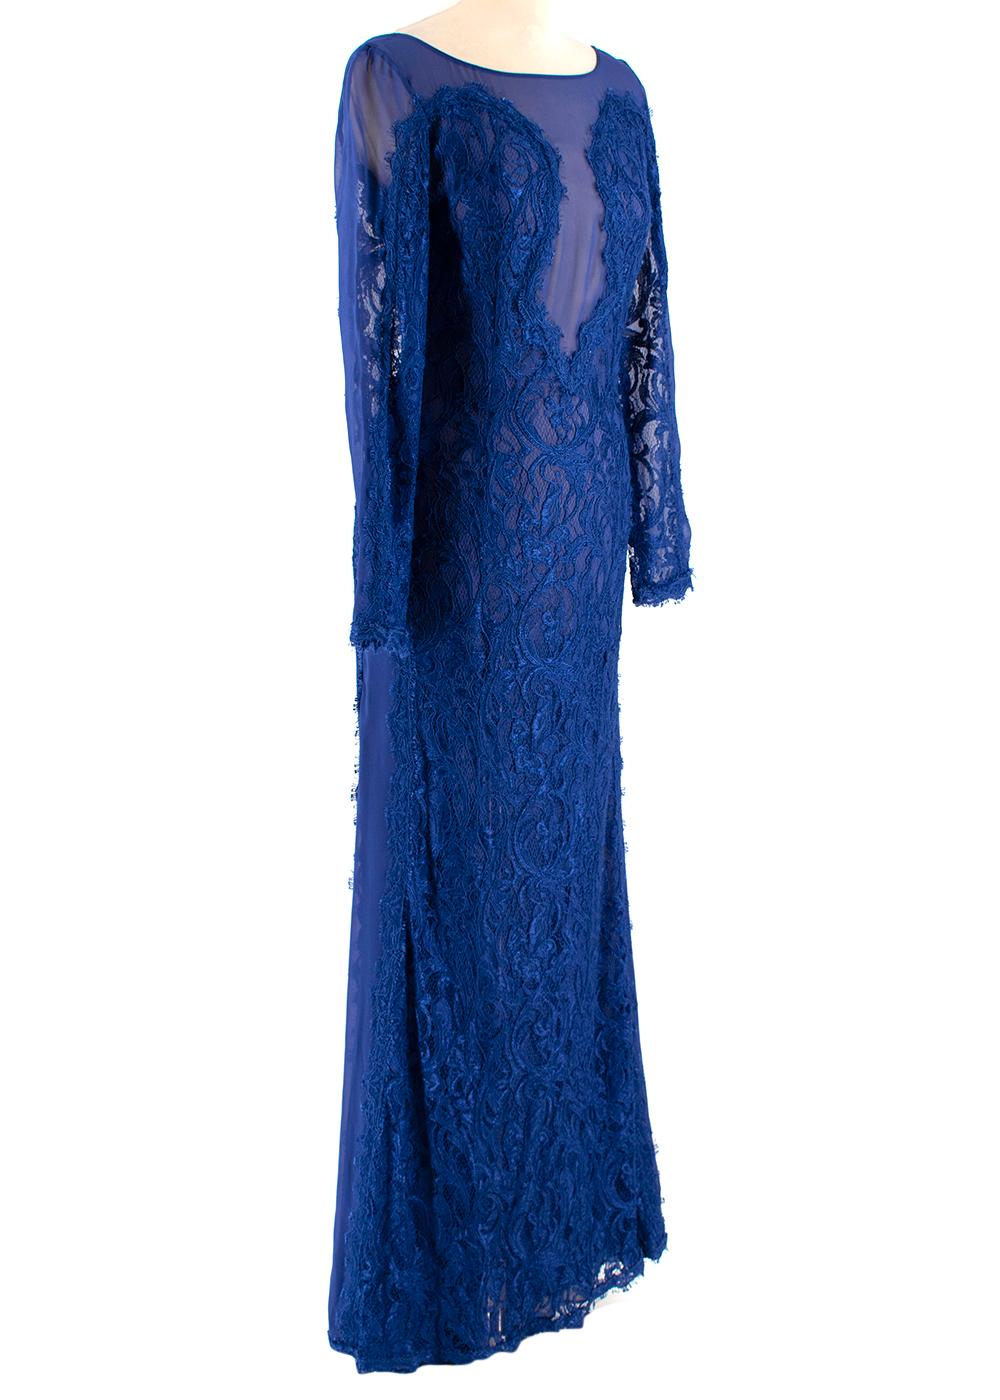 Emilio Pucci Blue Lace Illusion Gown - Size US 0-2 In Excellent Condition For Sale In London, GB